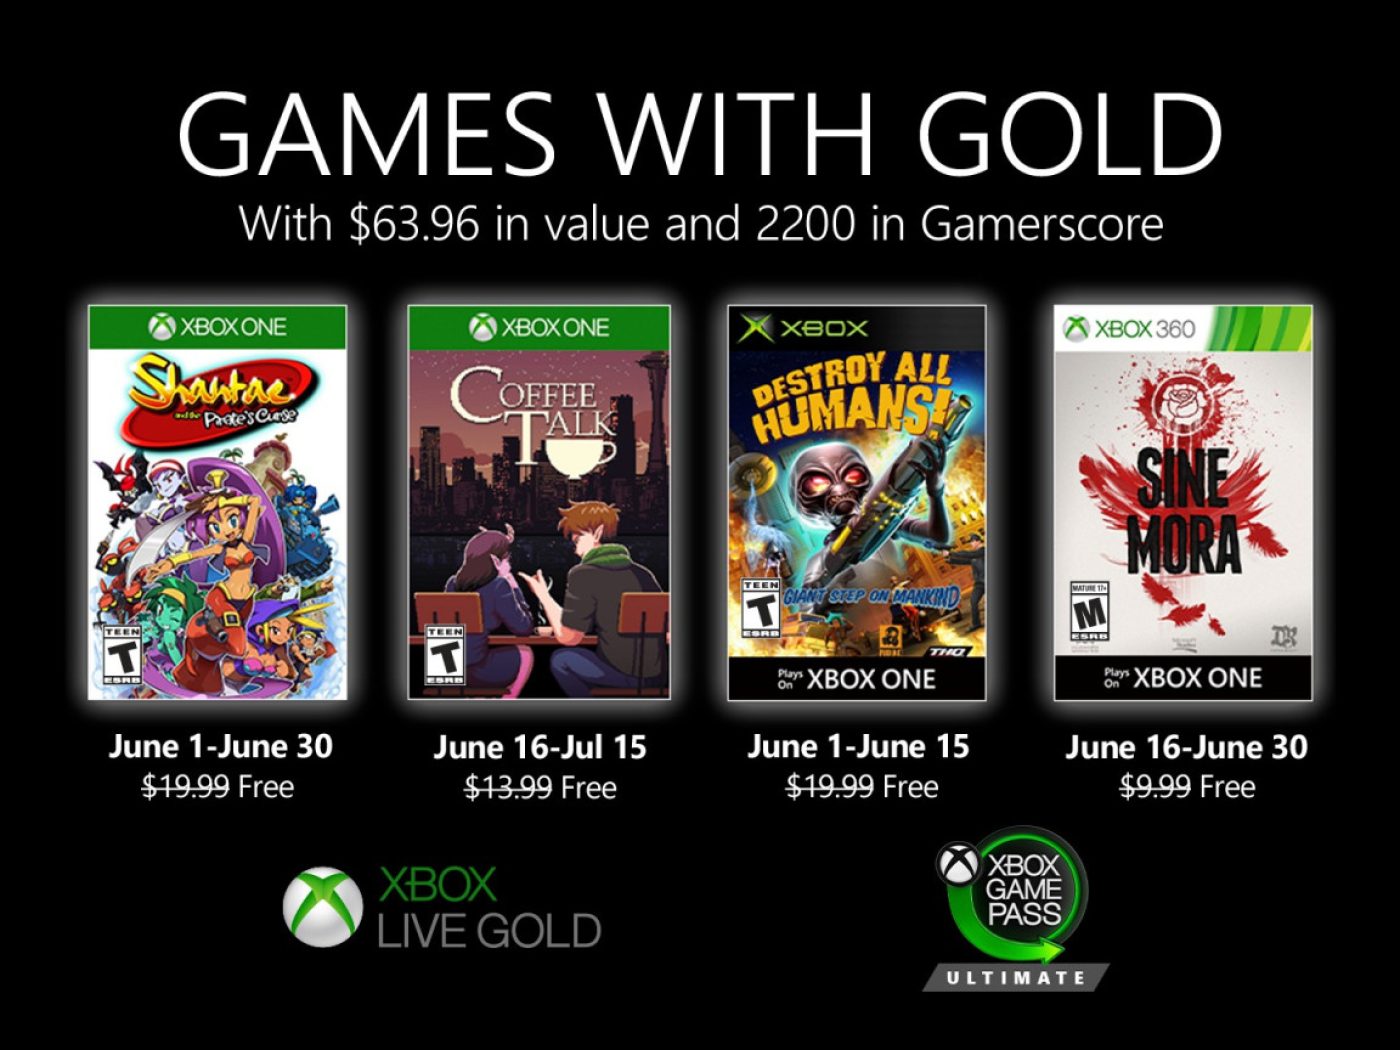 All the Xbox 360 Games Ever Given Away Through Games with Gold